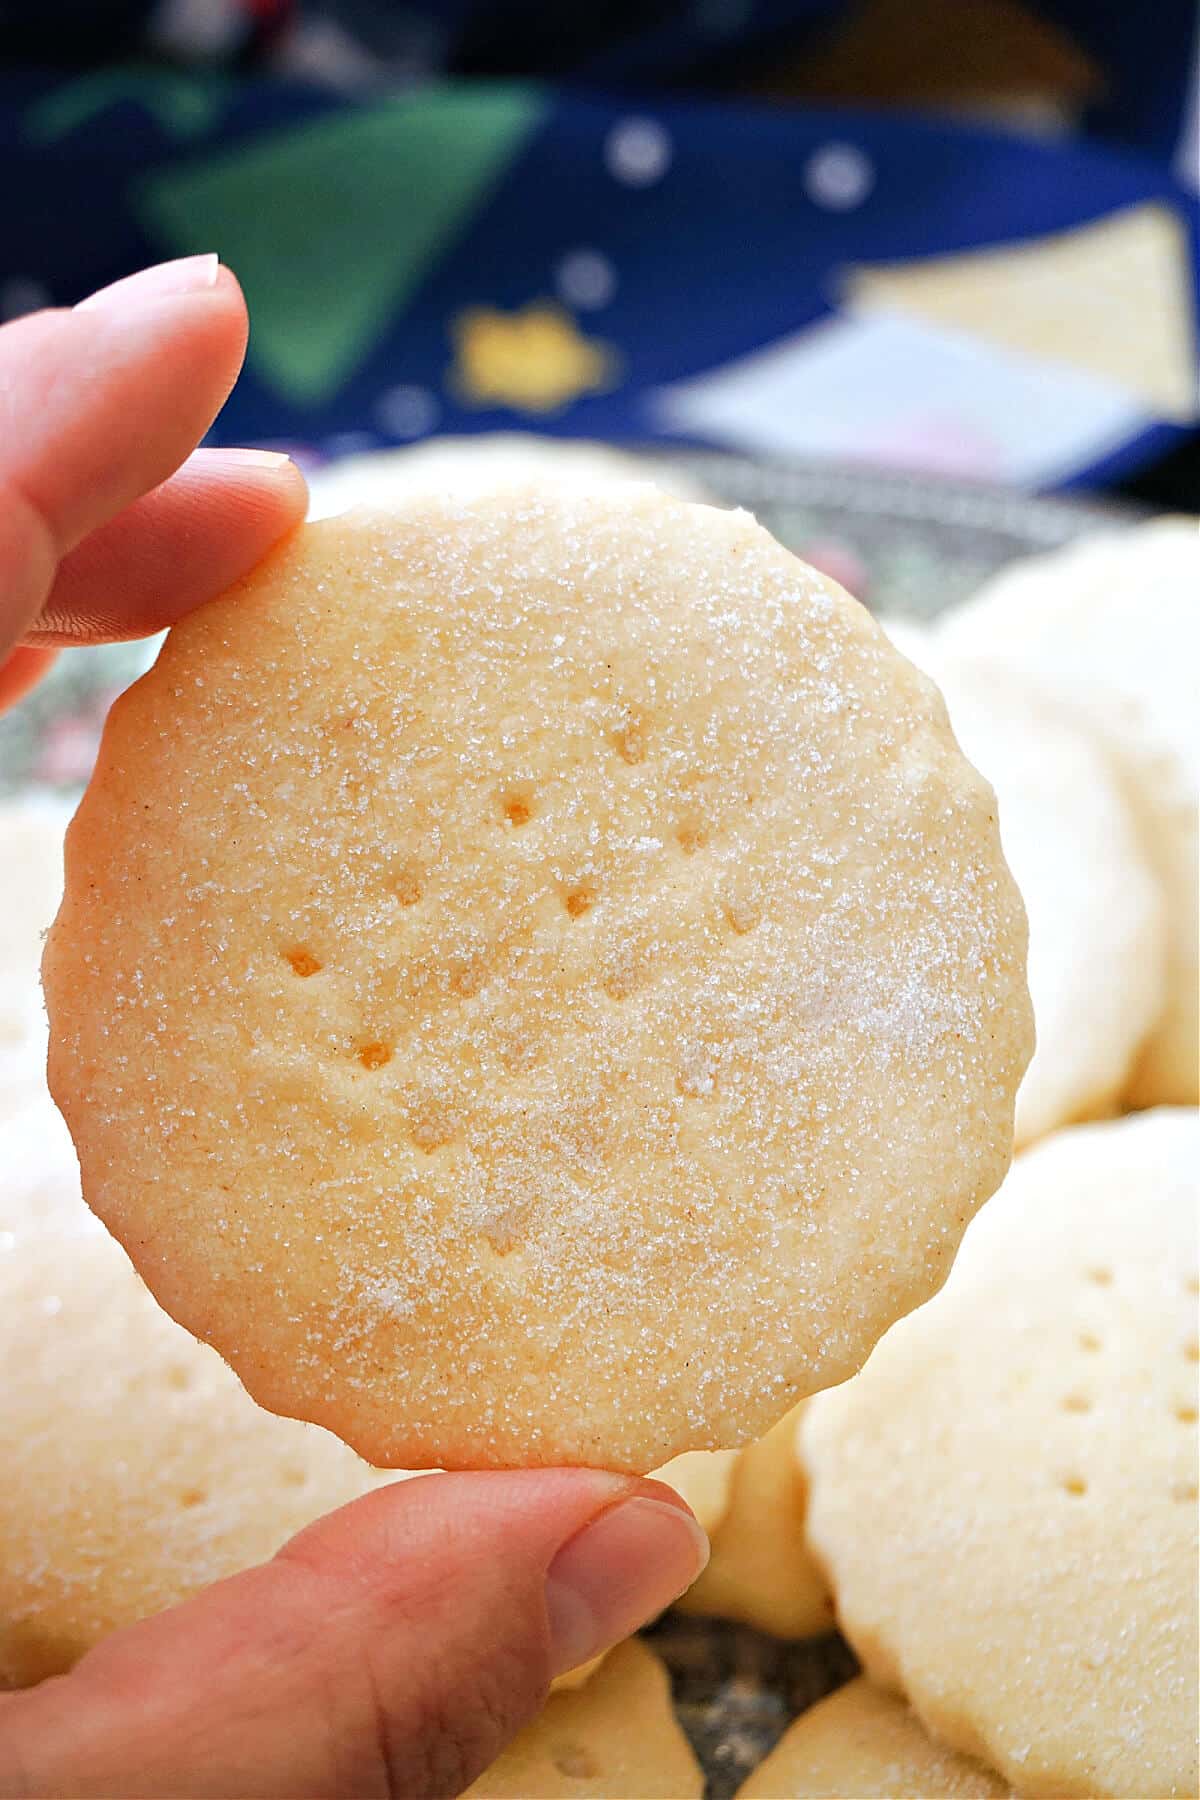 A shortbread cookie held by hand.